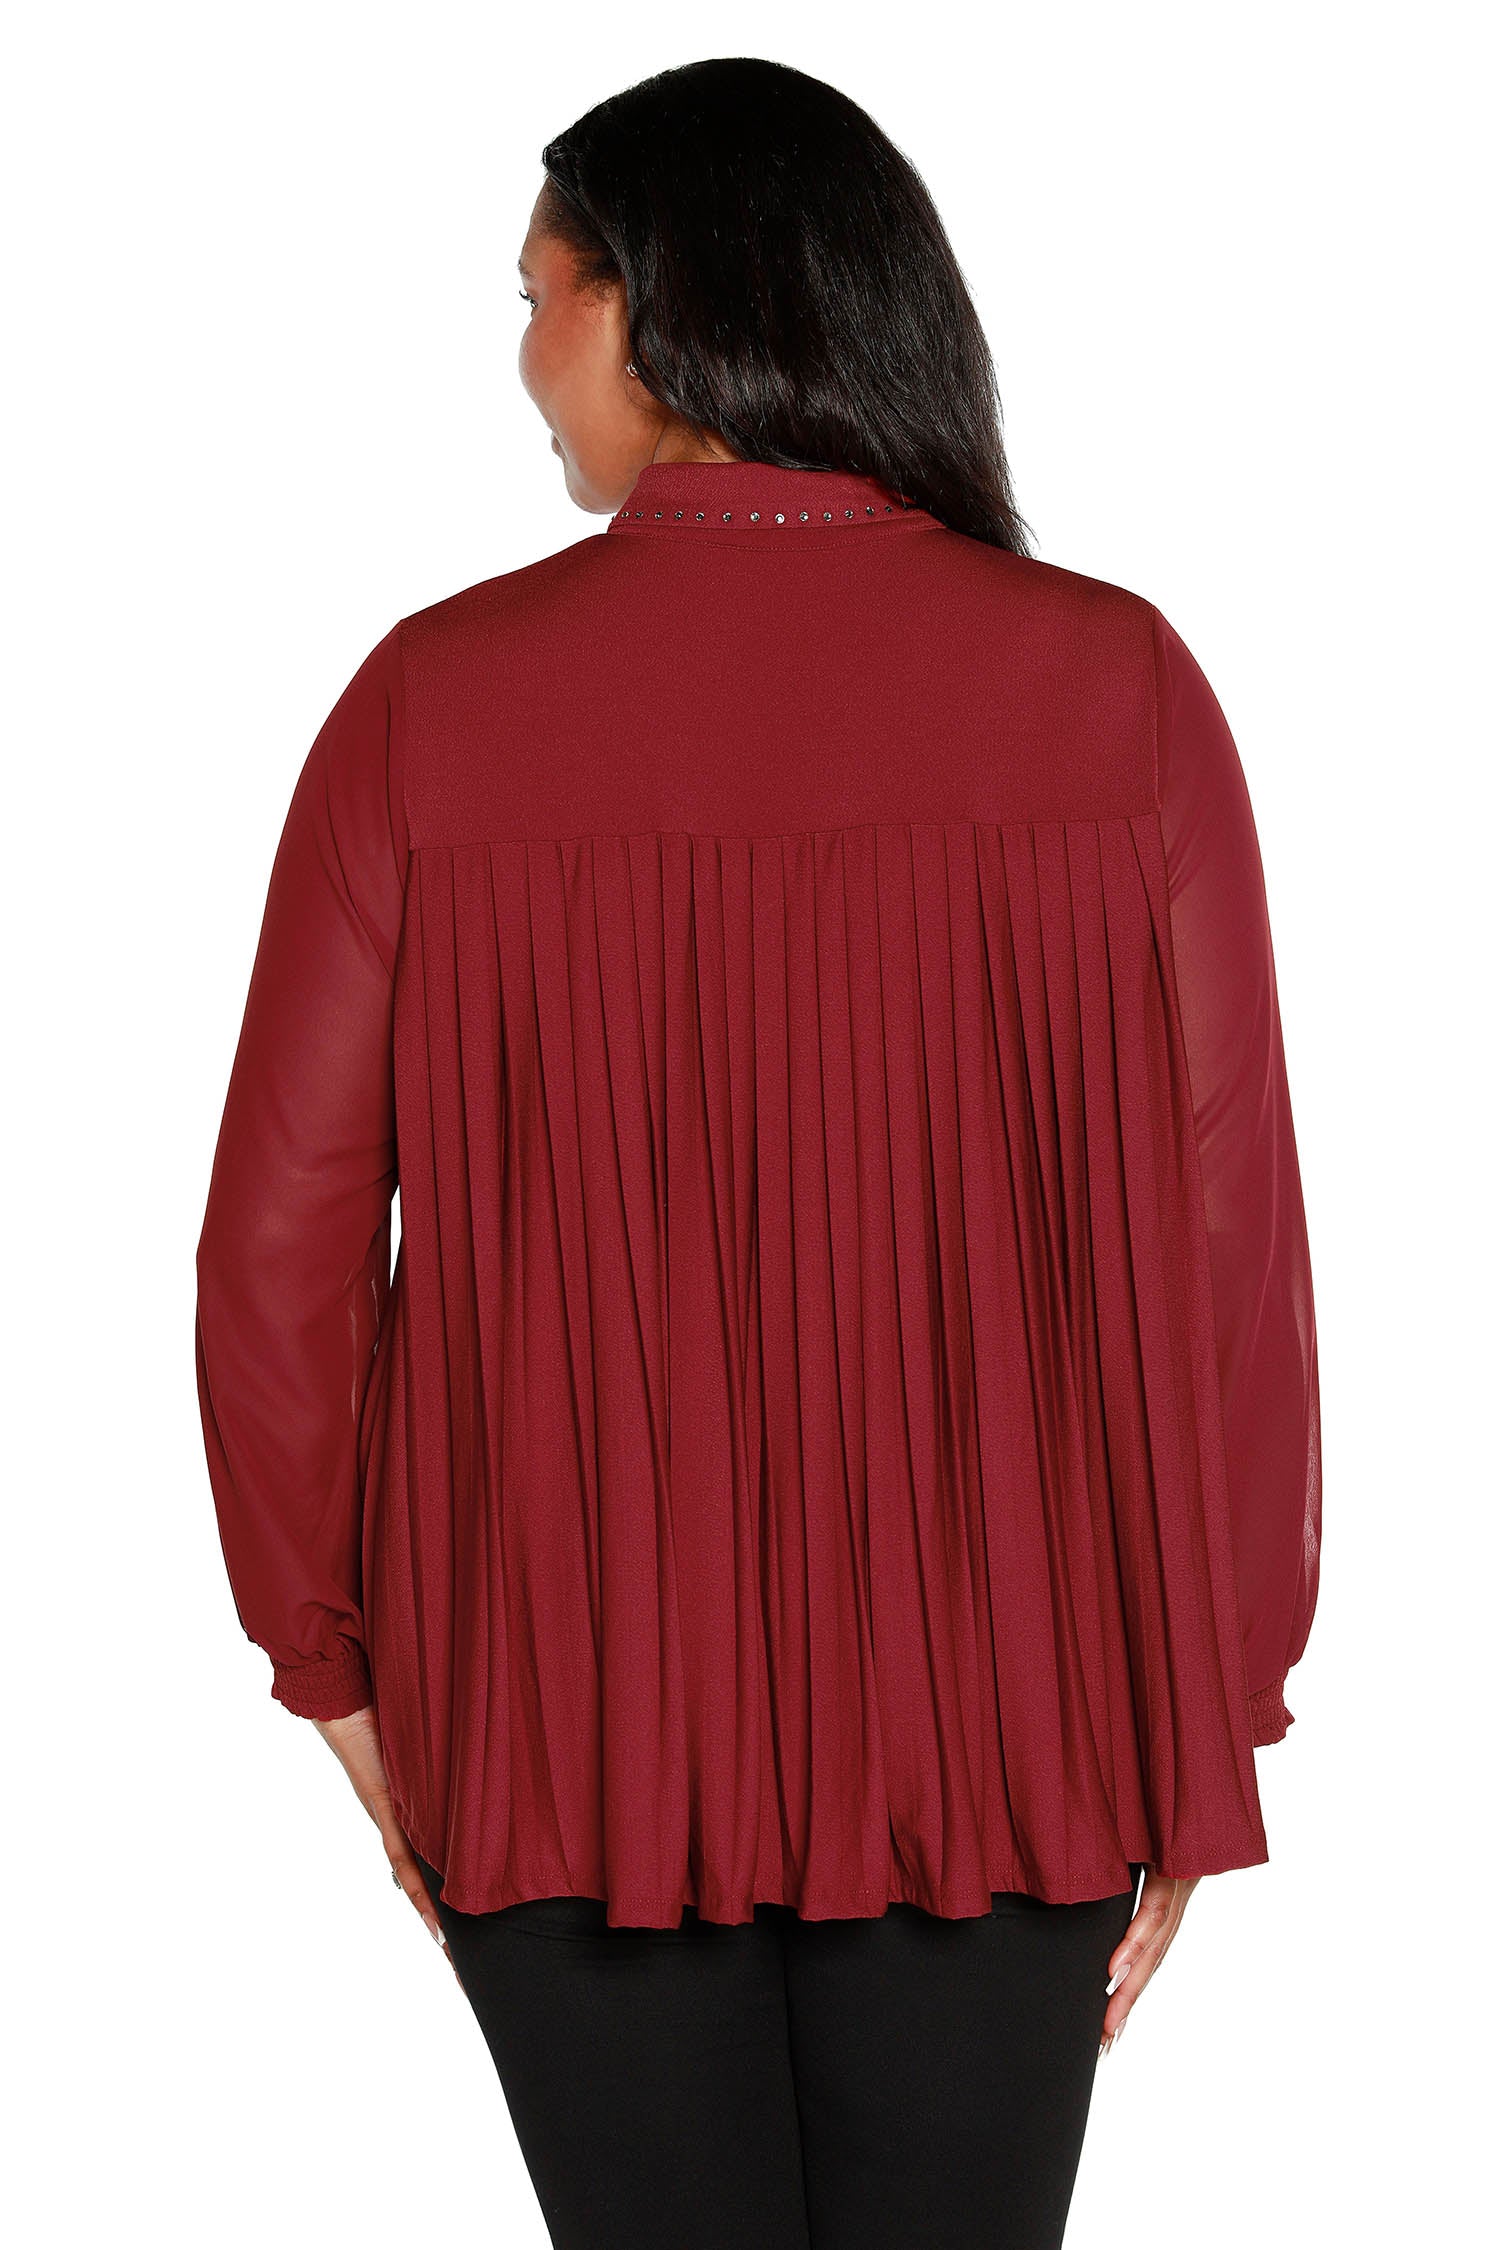 Womens Button Front Blouse with Pleated Back Chiffon Sleeves and Rhinestones on the Collar | Curvy